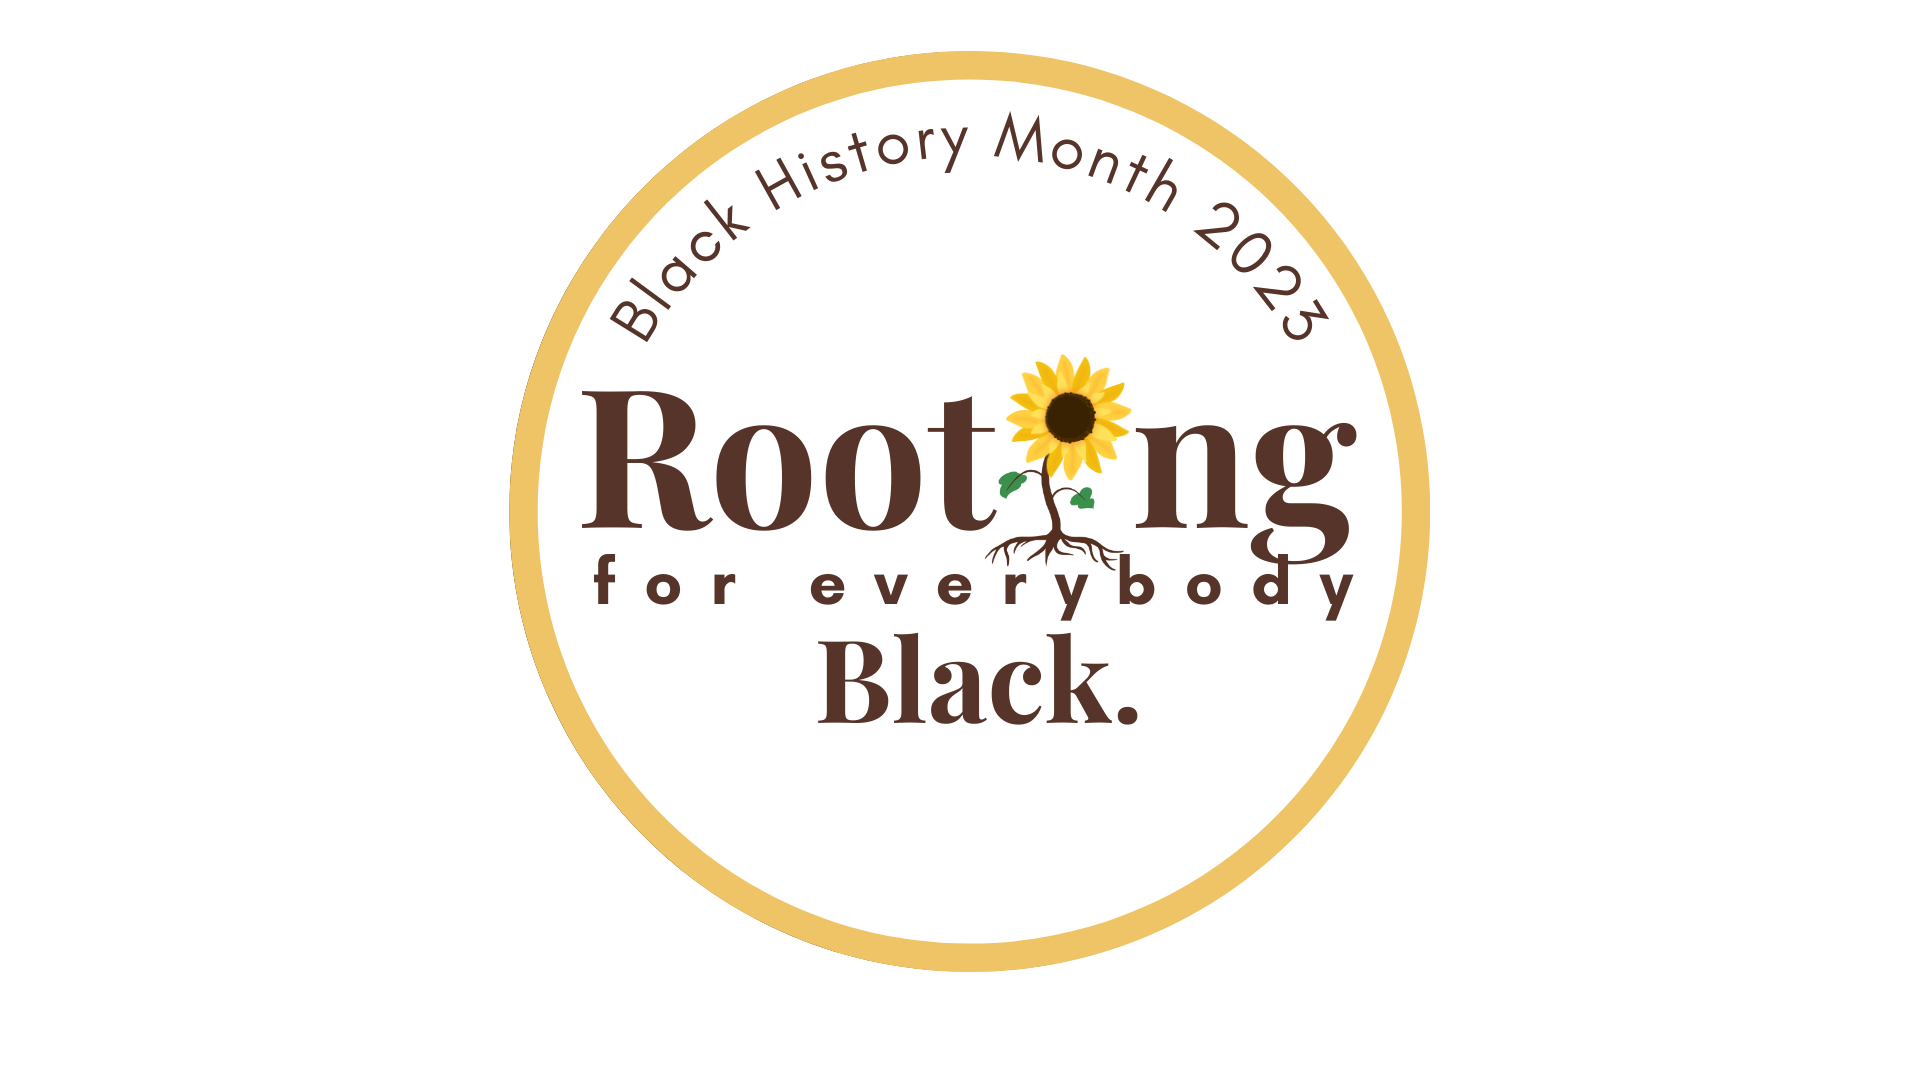 rooting for everybody black in a circular border